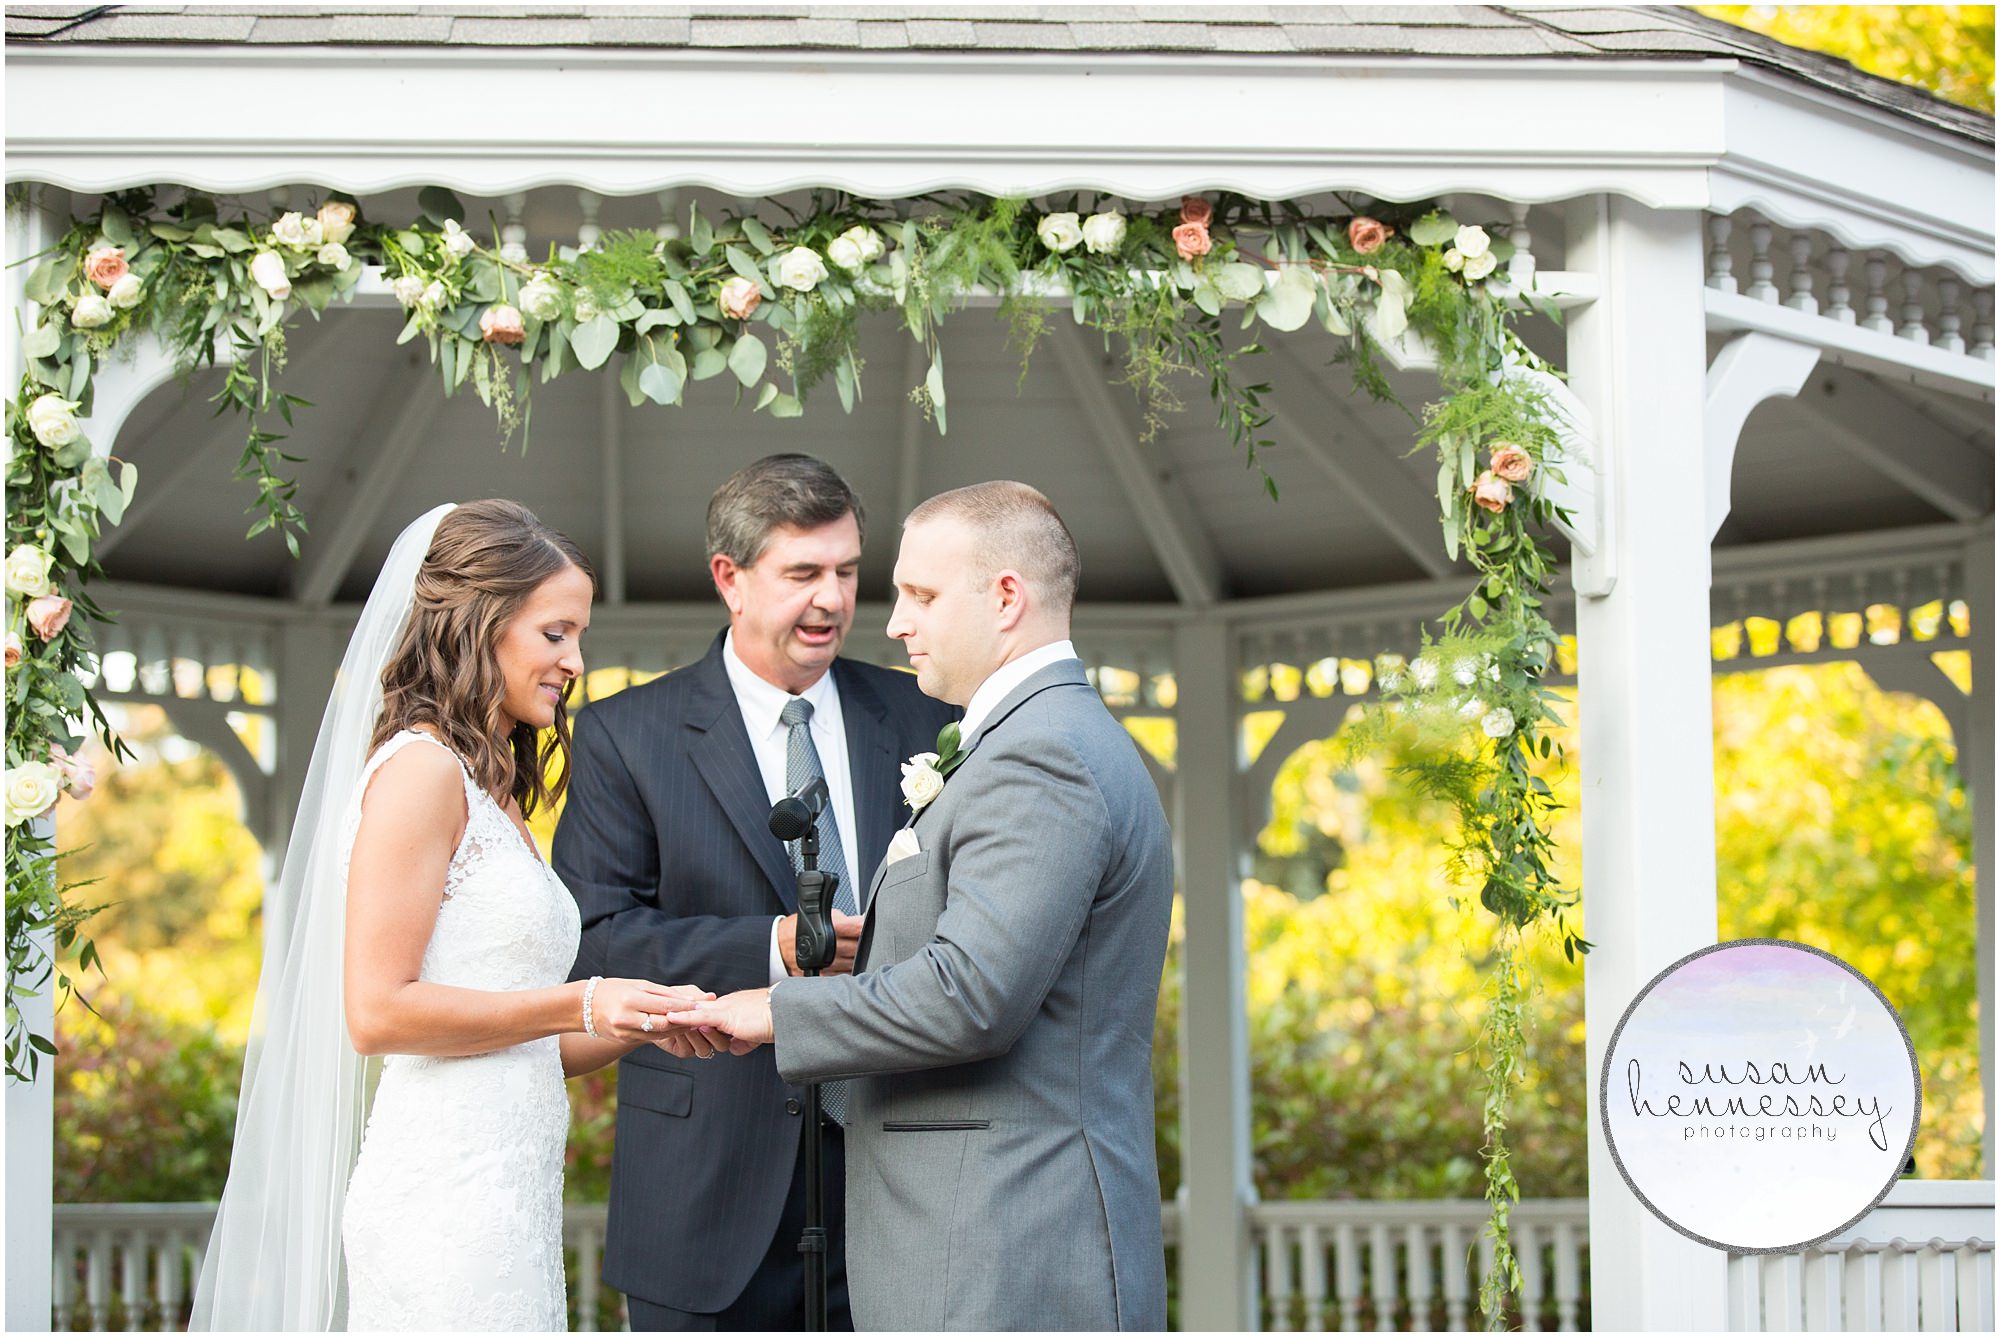 Ring exchange at Old York Country Club wedding.